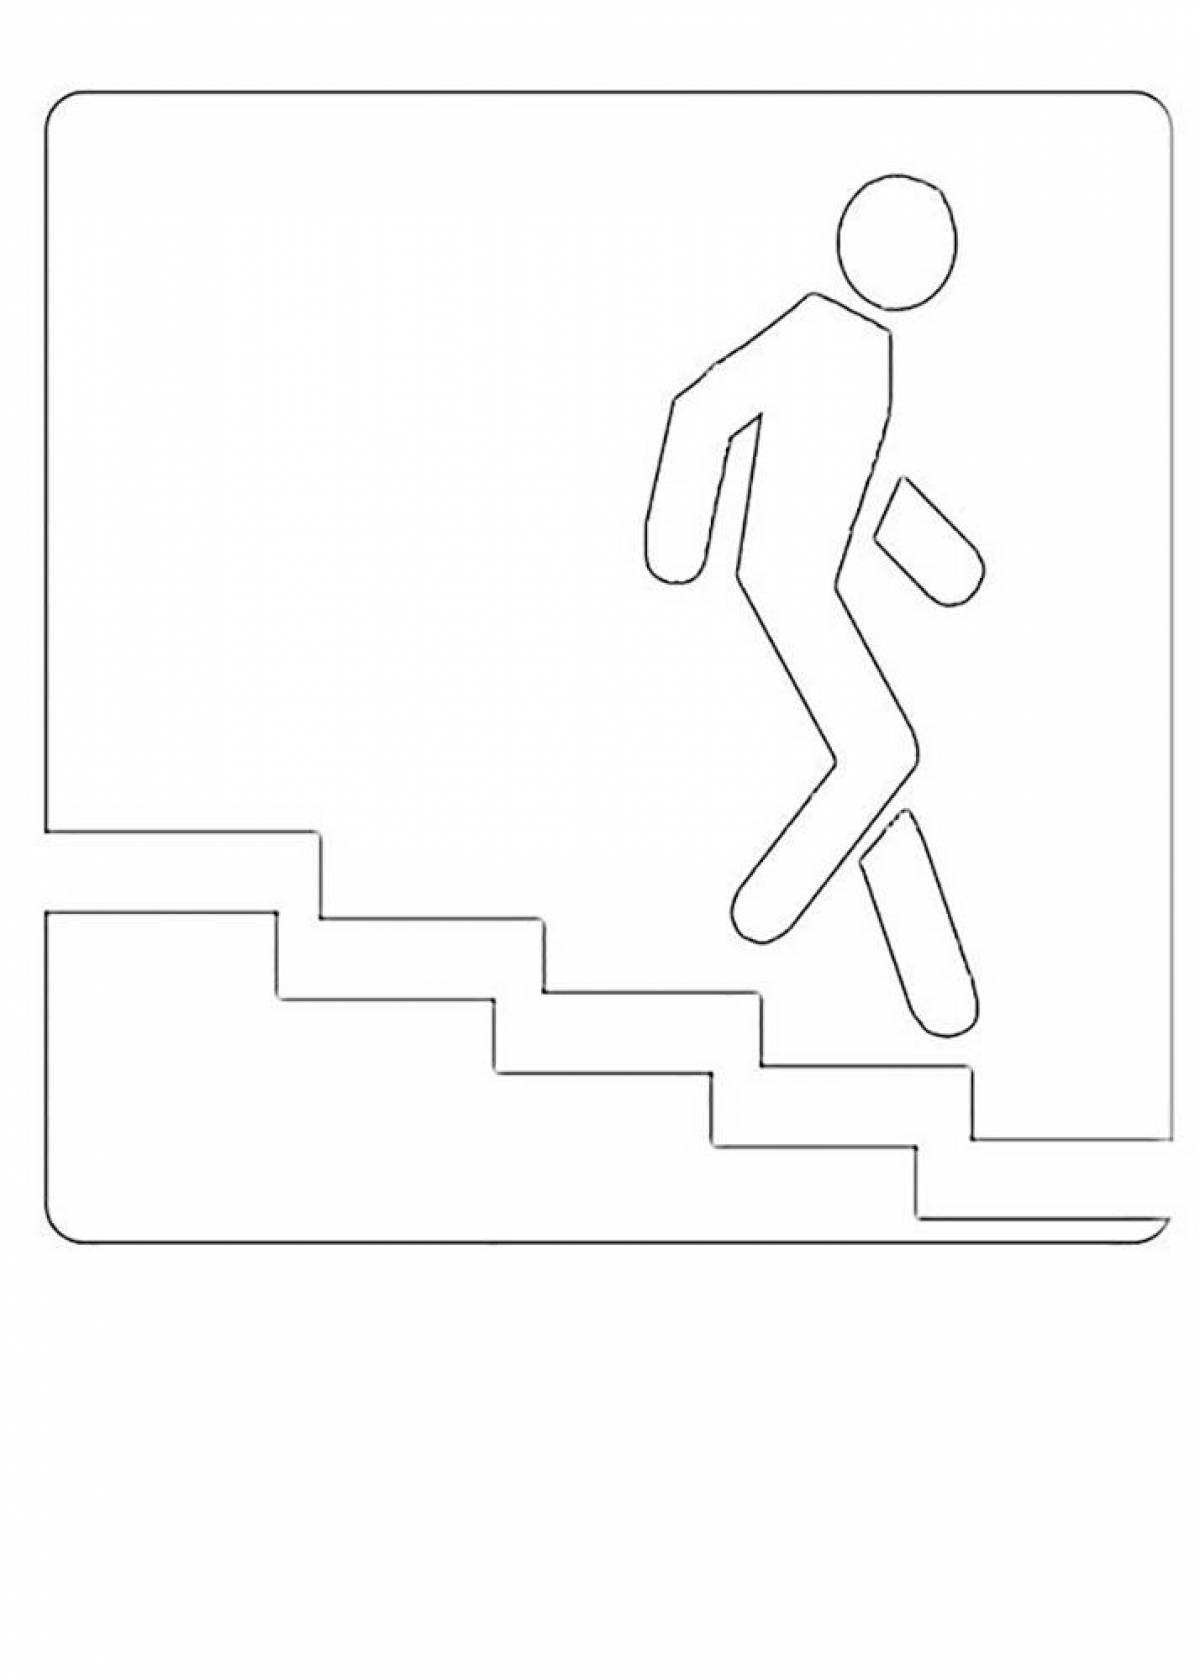 Pedestrian crossing holiday sign coloring page